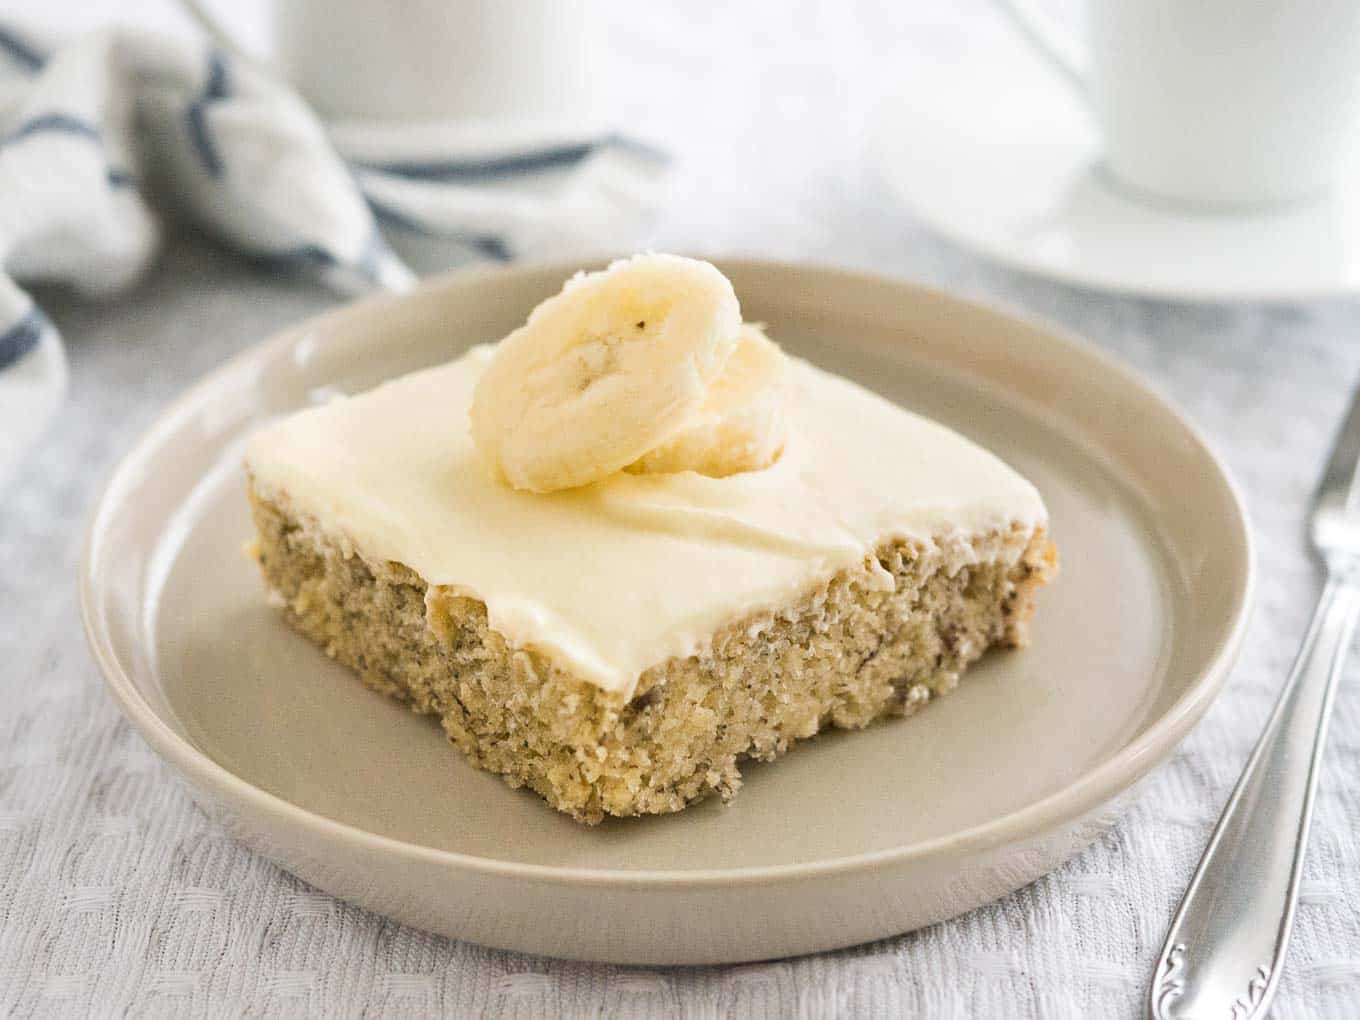 Easy Banana Cake - this fluffy and moist sheet cake has a mascarpone frosting on top and is ready in under 30 mins! A perfect cake to use overripe bananas.